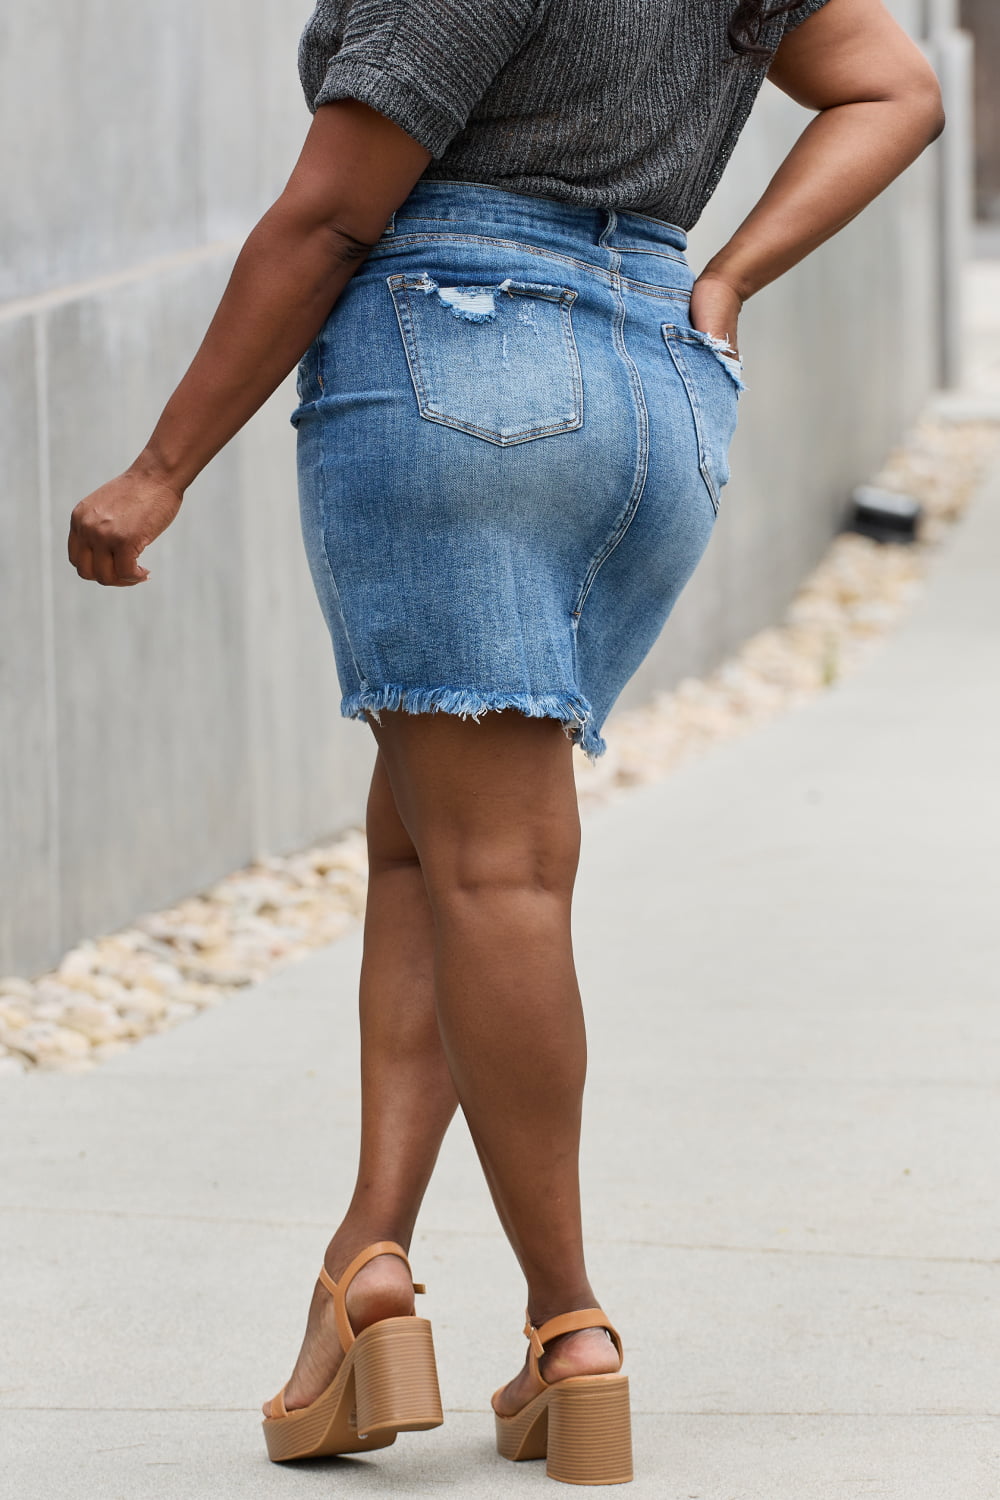 Denim Skirt x Cozy Sweater - My Curves And Curls | Plus size fall fashion, Plus  size fall outfit, Fall fashion sweaters